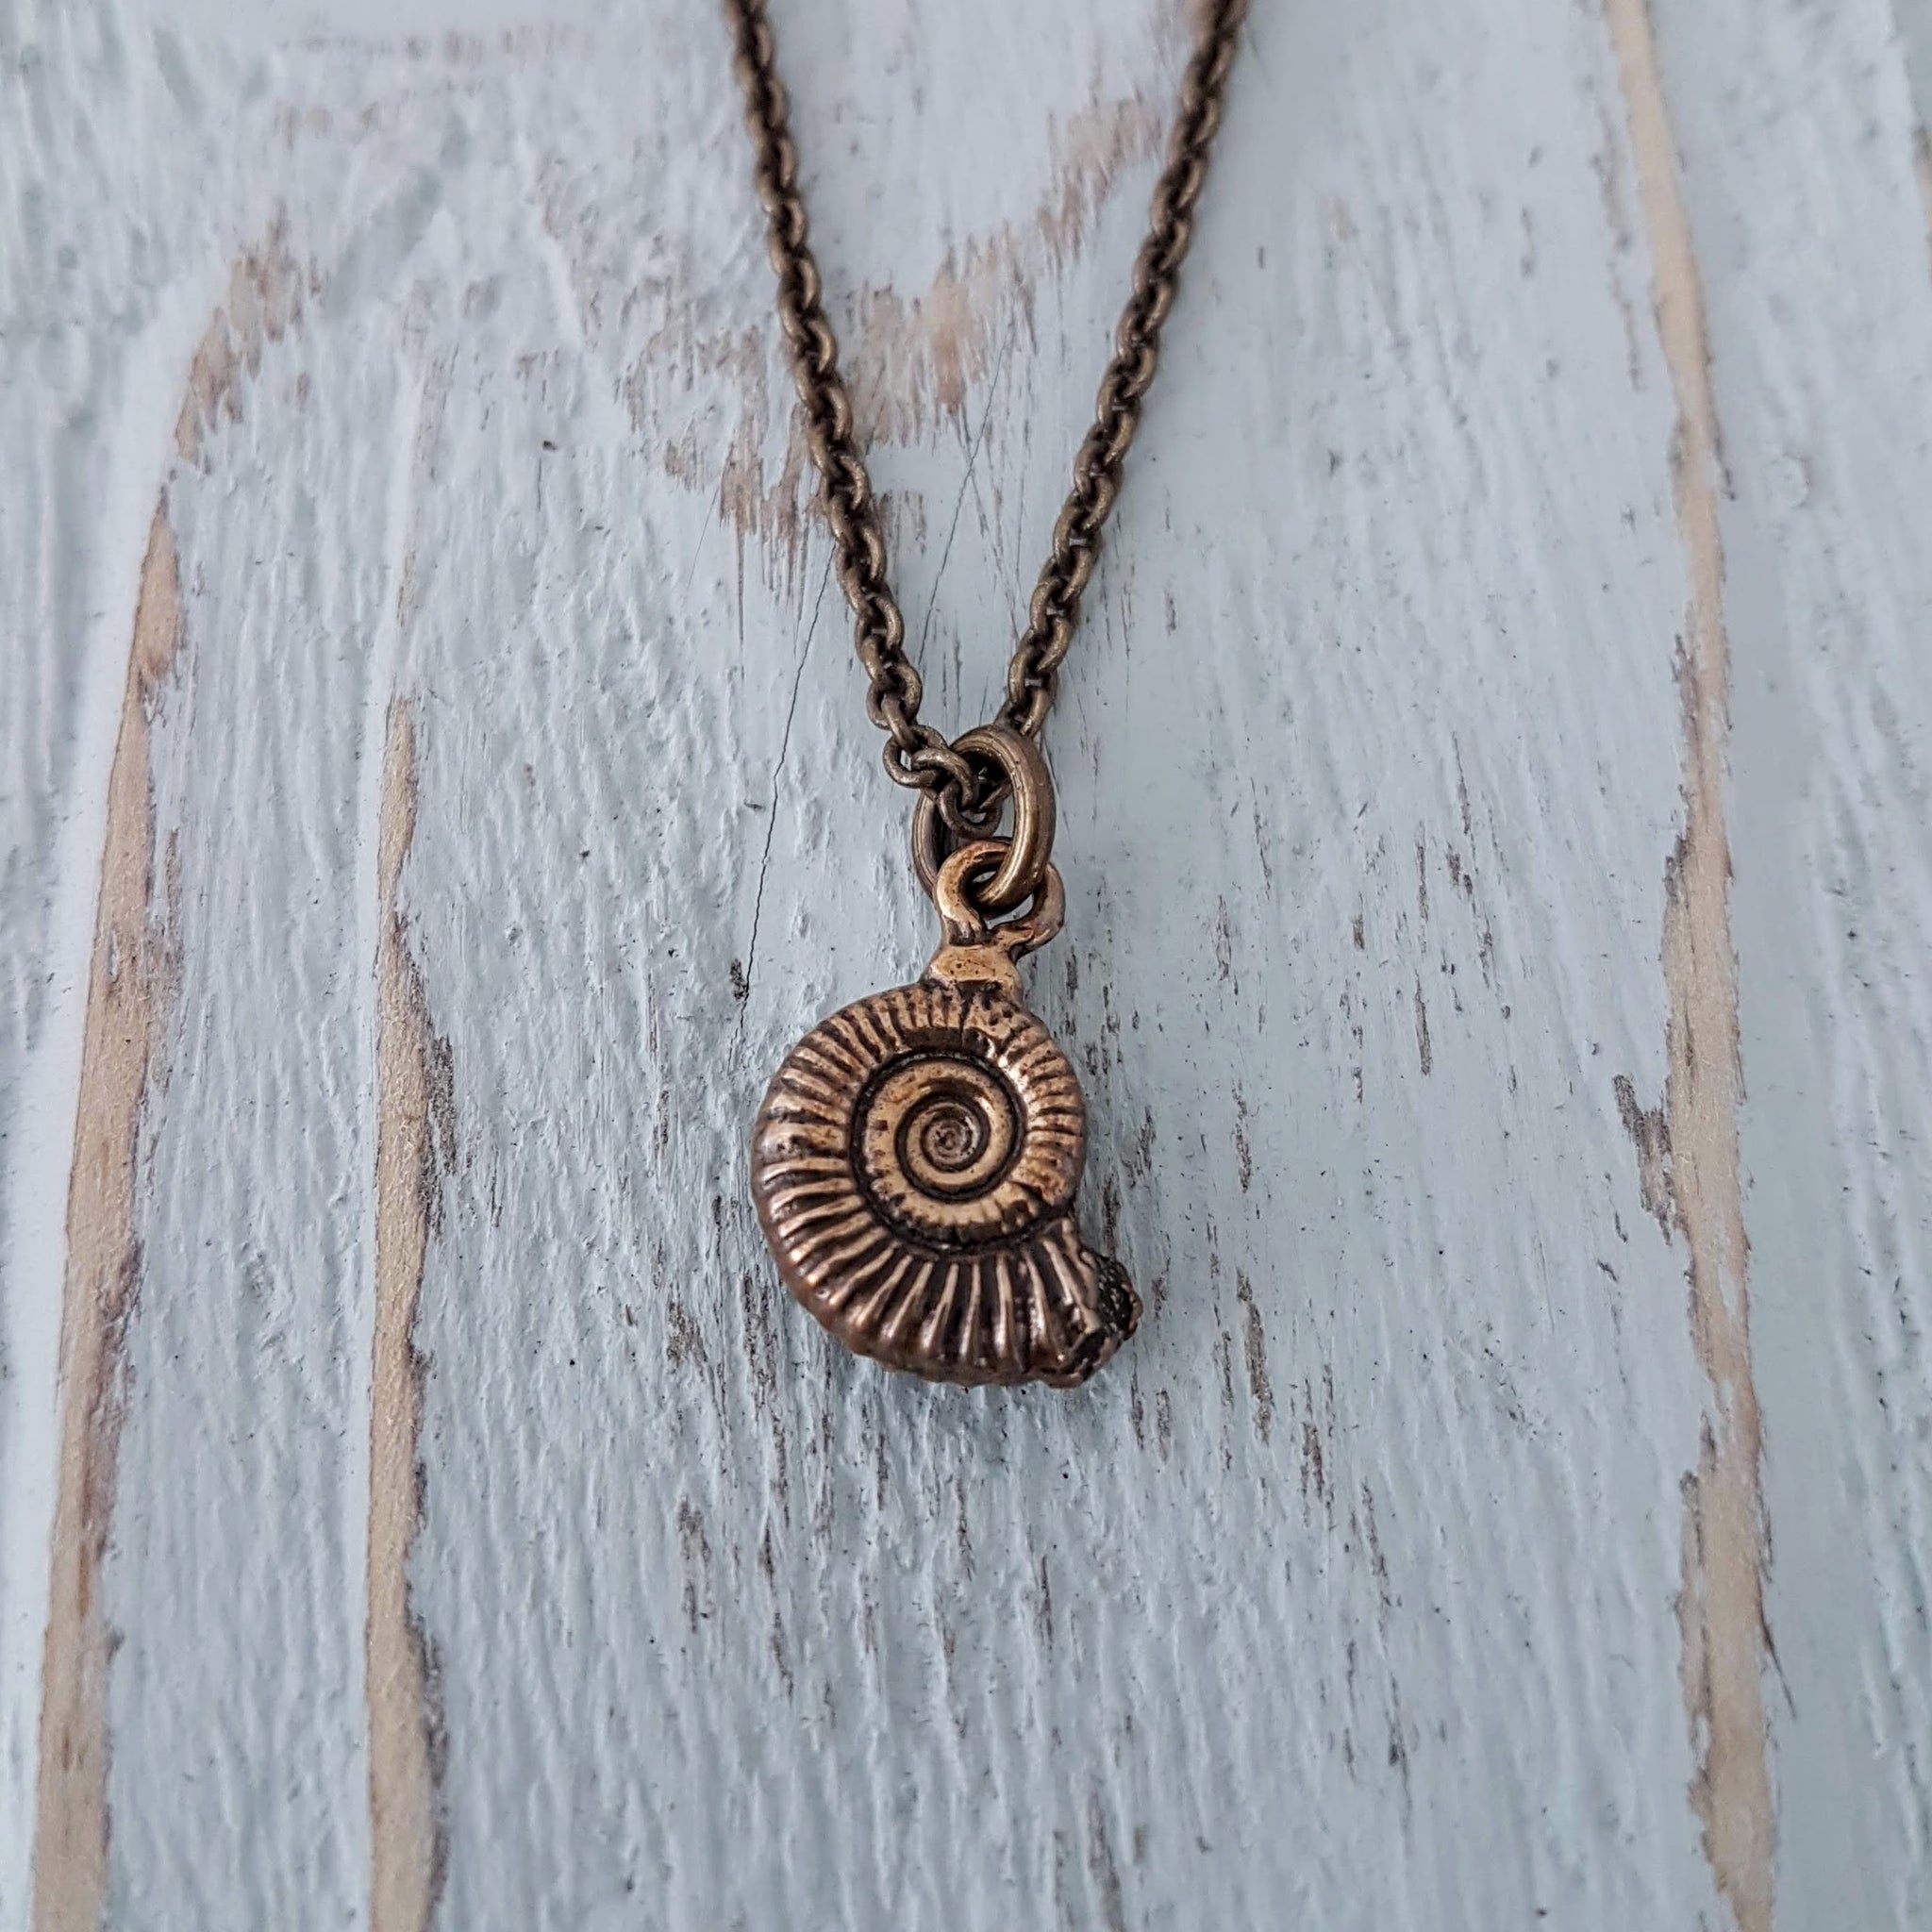 Ammonite Fossil Necklace - Gwen Delicious Jewelry Designs